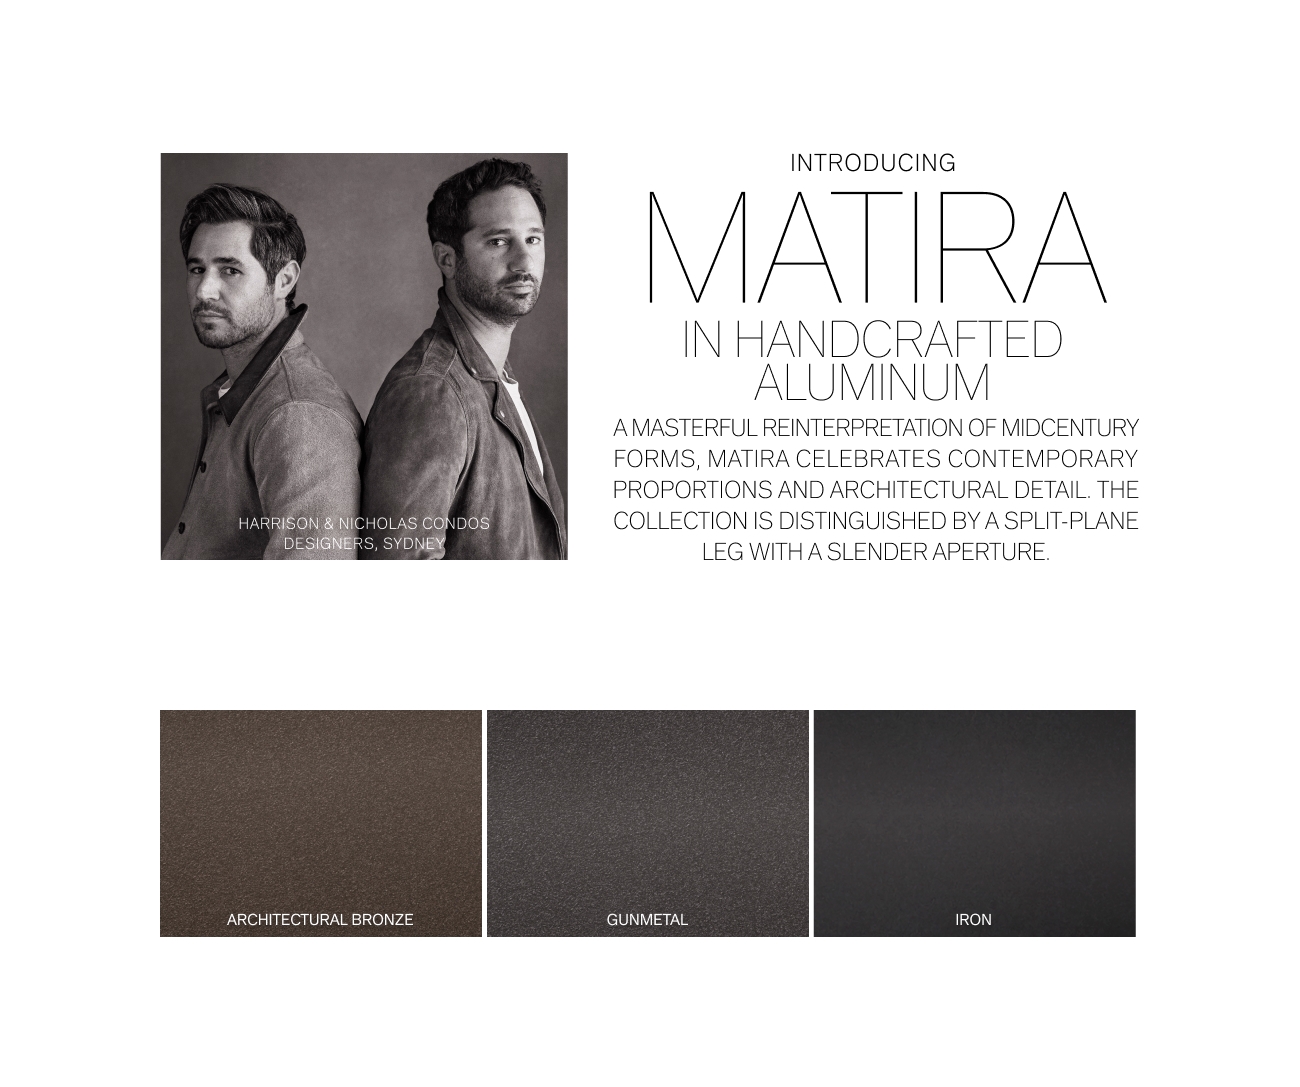 INTRODUCING MATTA IN HANDCRAFTE ALUMINU AMASTERFUL REINTERPRETATION OF MIDCENTURY FORMS, MATIRA CELEBRATES CONTEMPORARY PROPORTIONS AND ARCHITECTURAL DETAIL. THE ohDoS COLLECTION IS DISTINGUISHED BY A SPLIT-PLANE - 4 LEG WITH A SLENDER APERTURE. ARCHITECTURAL BRONZE GUNMETAL 